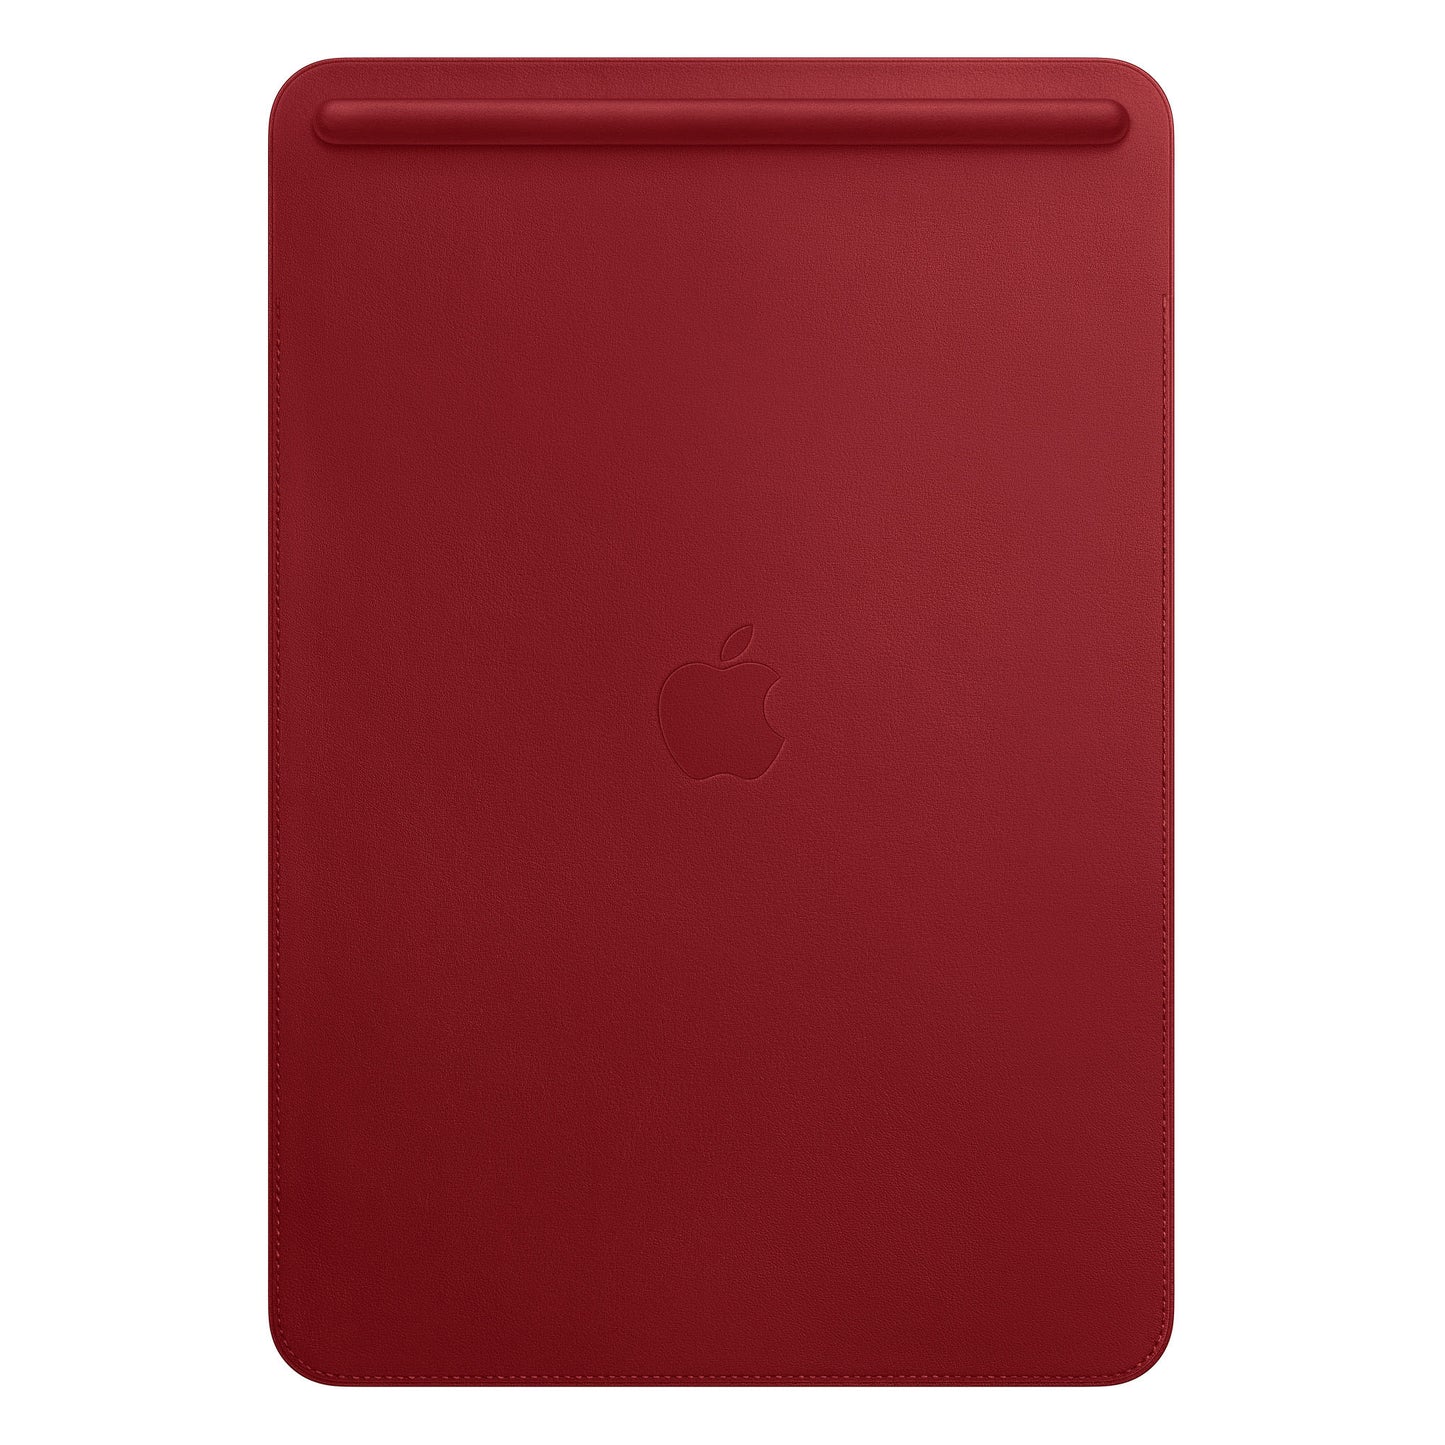 Leather Sleeve for 10.5_inch iPadæPro - (PRODUCT)RED